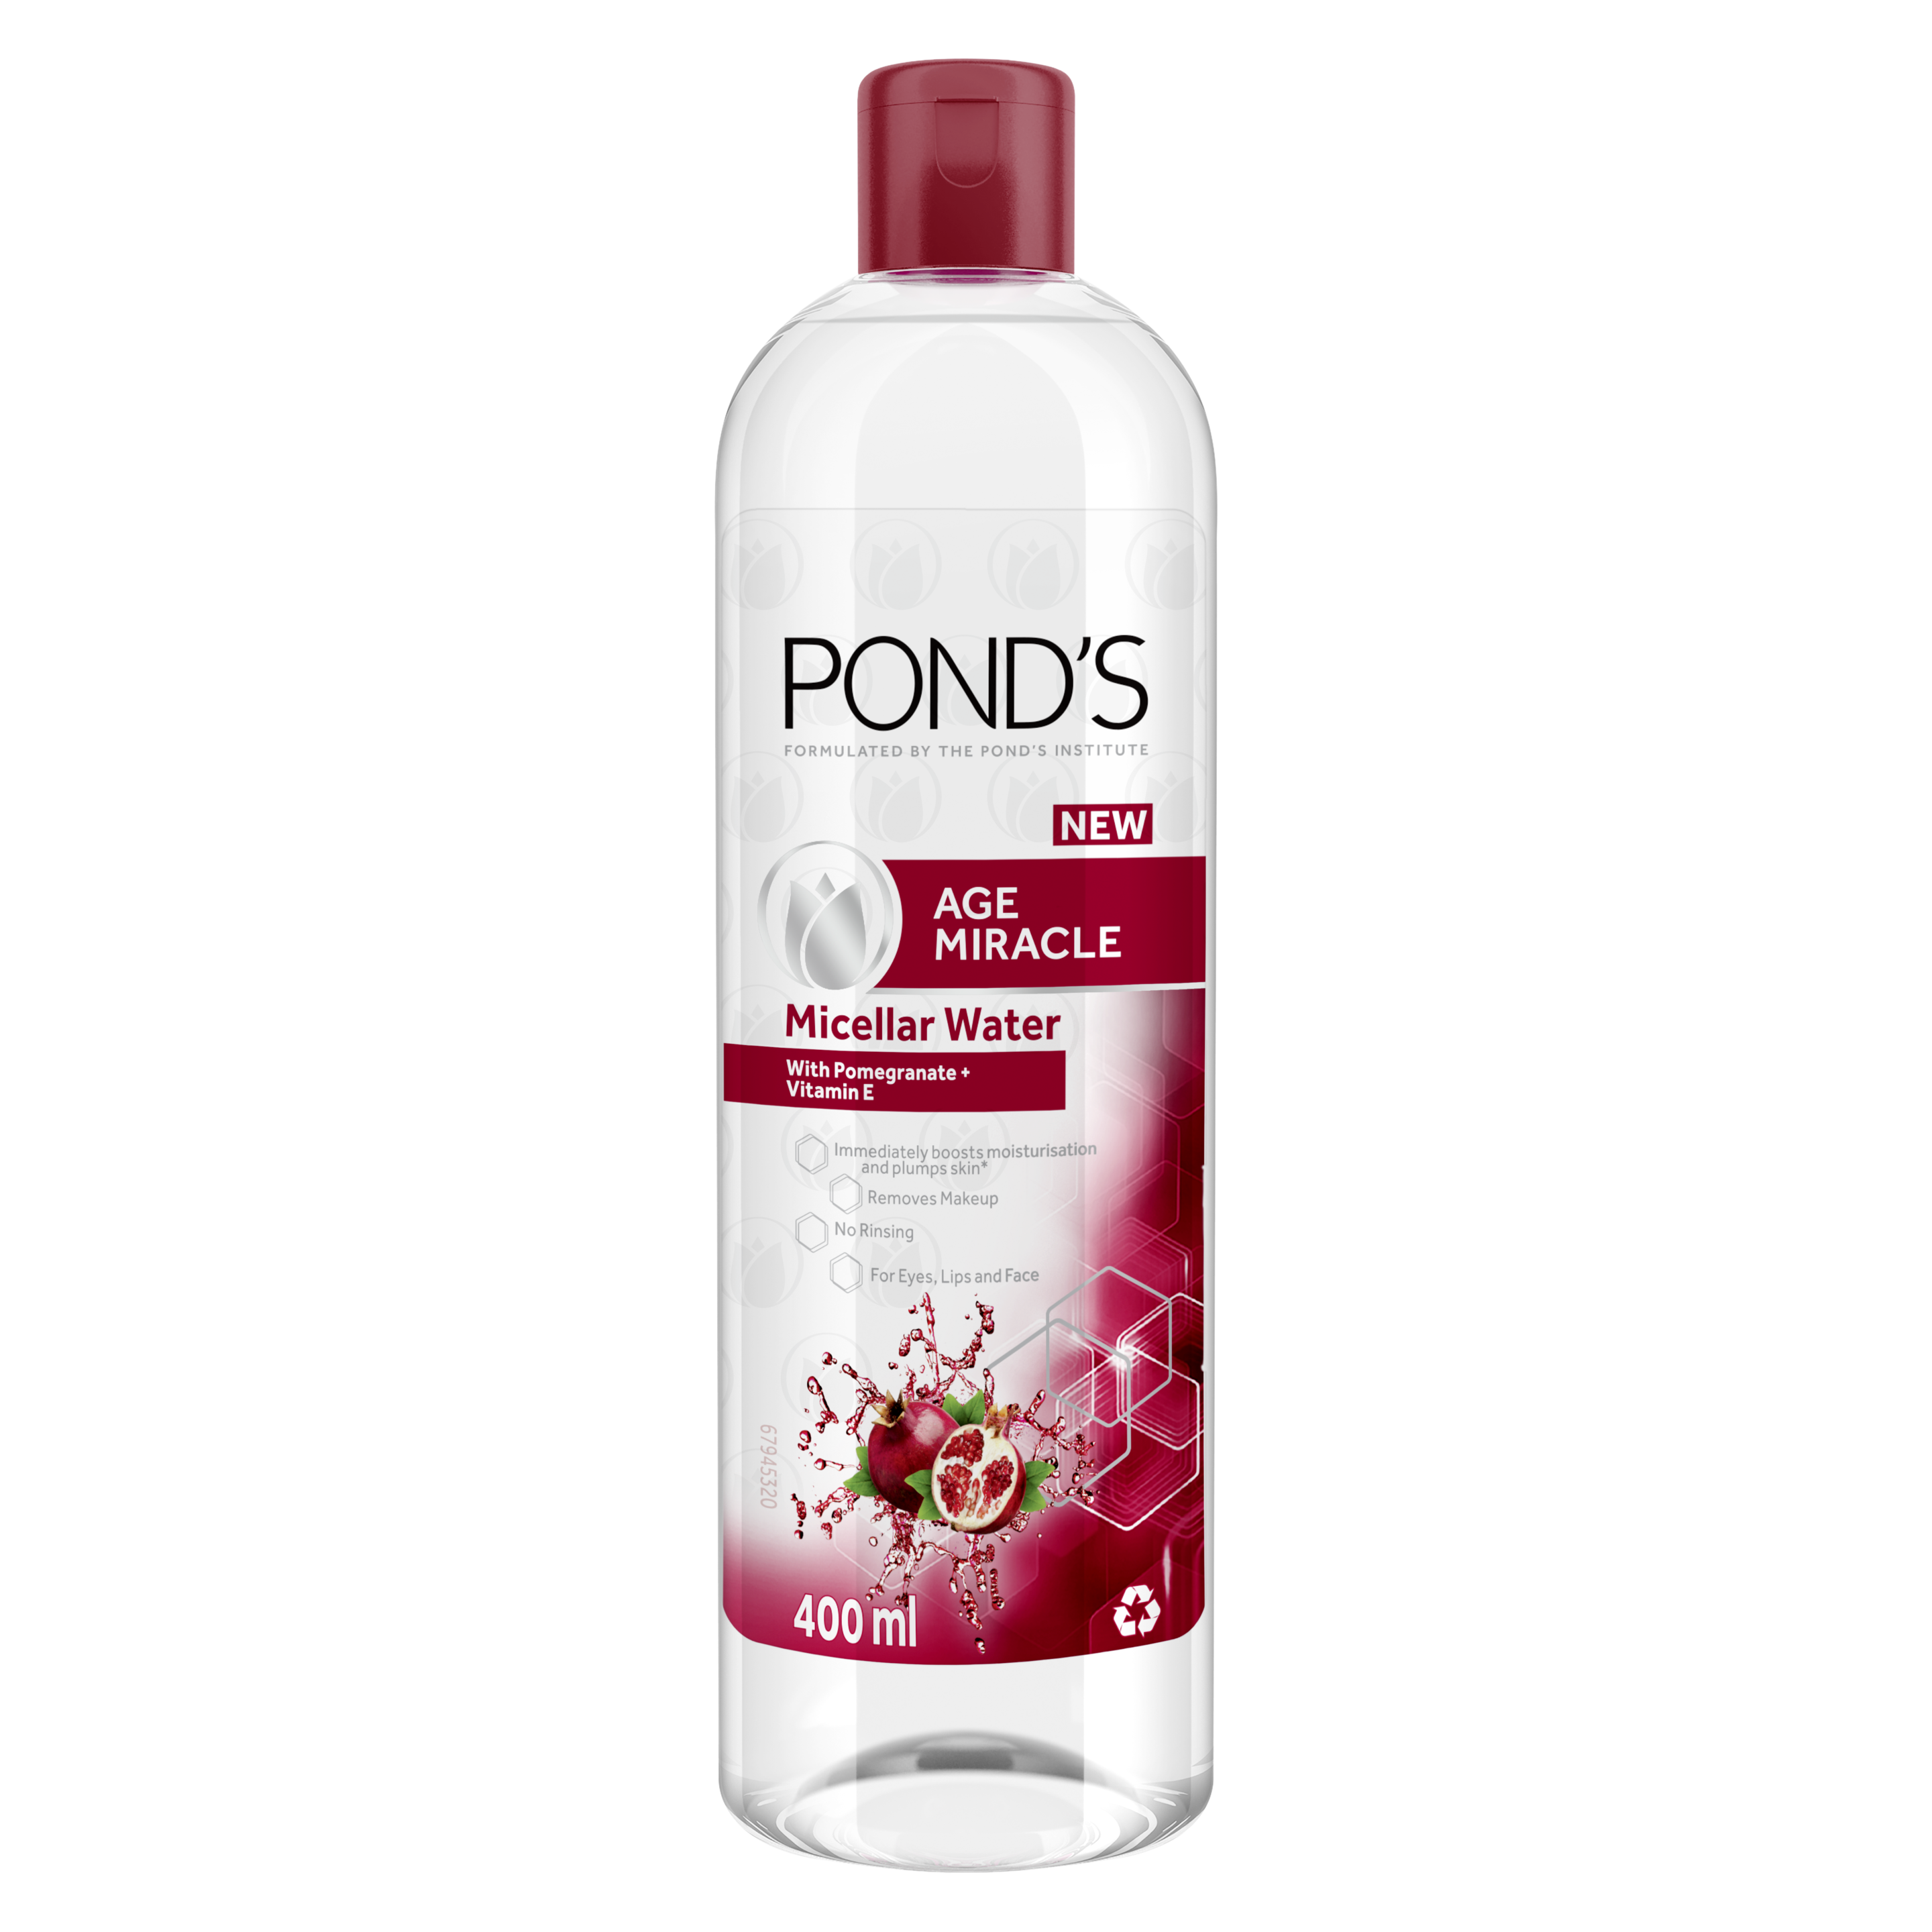 POND'S Age Miracle Micellar Water 400ml